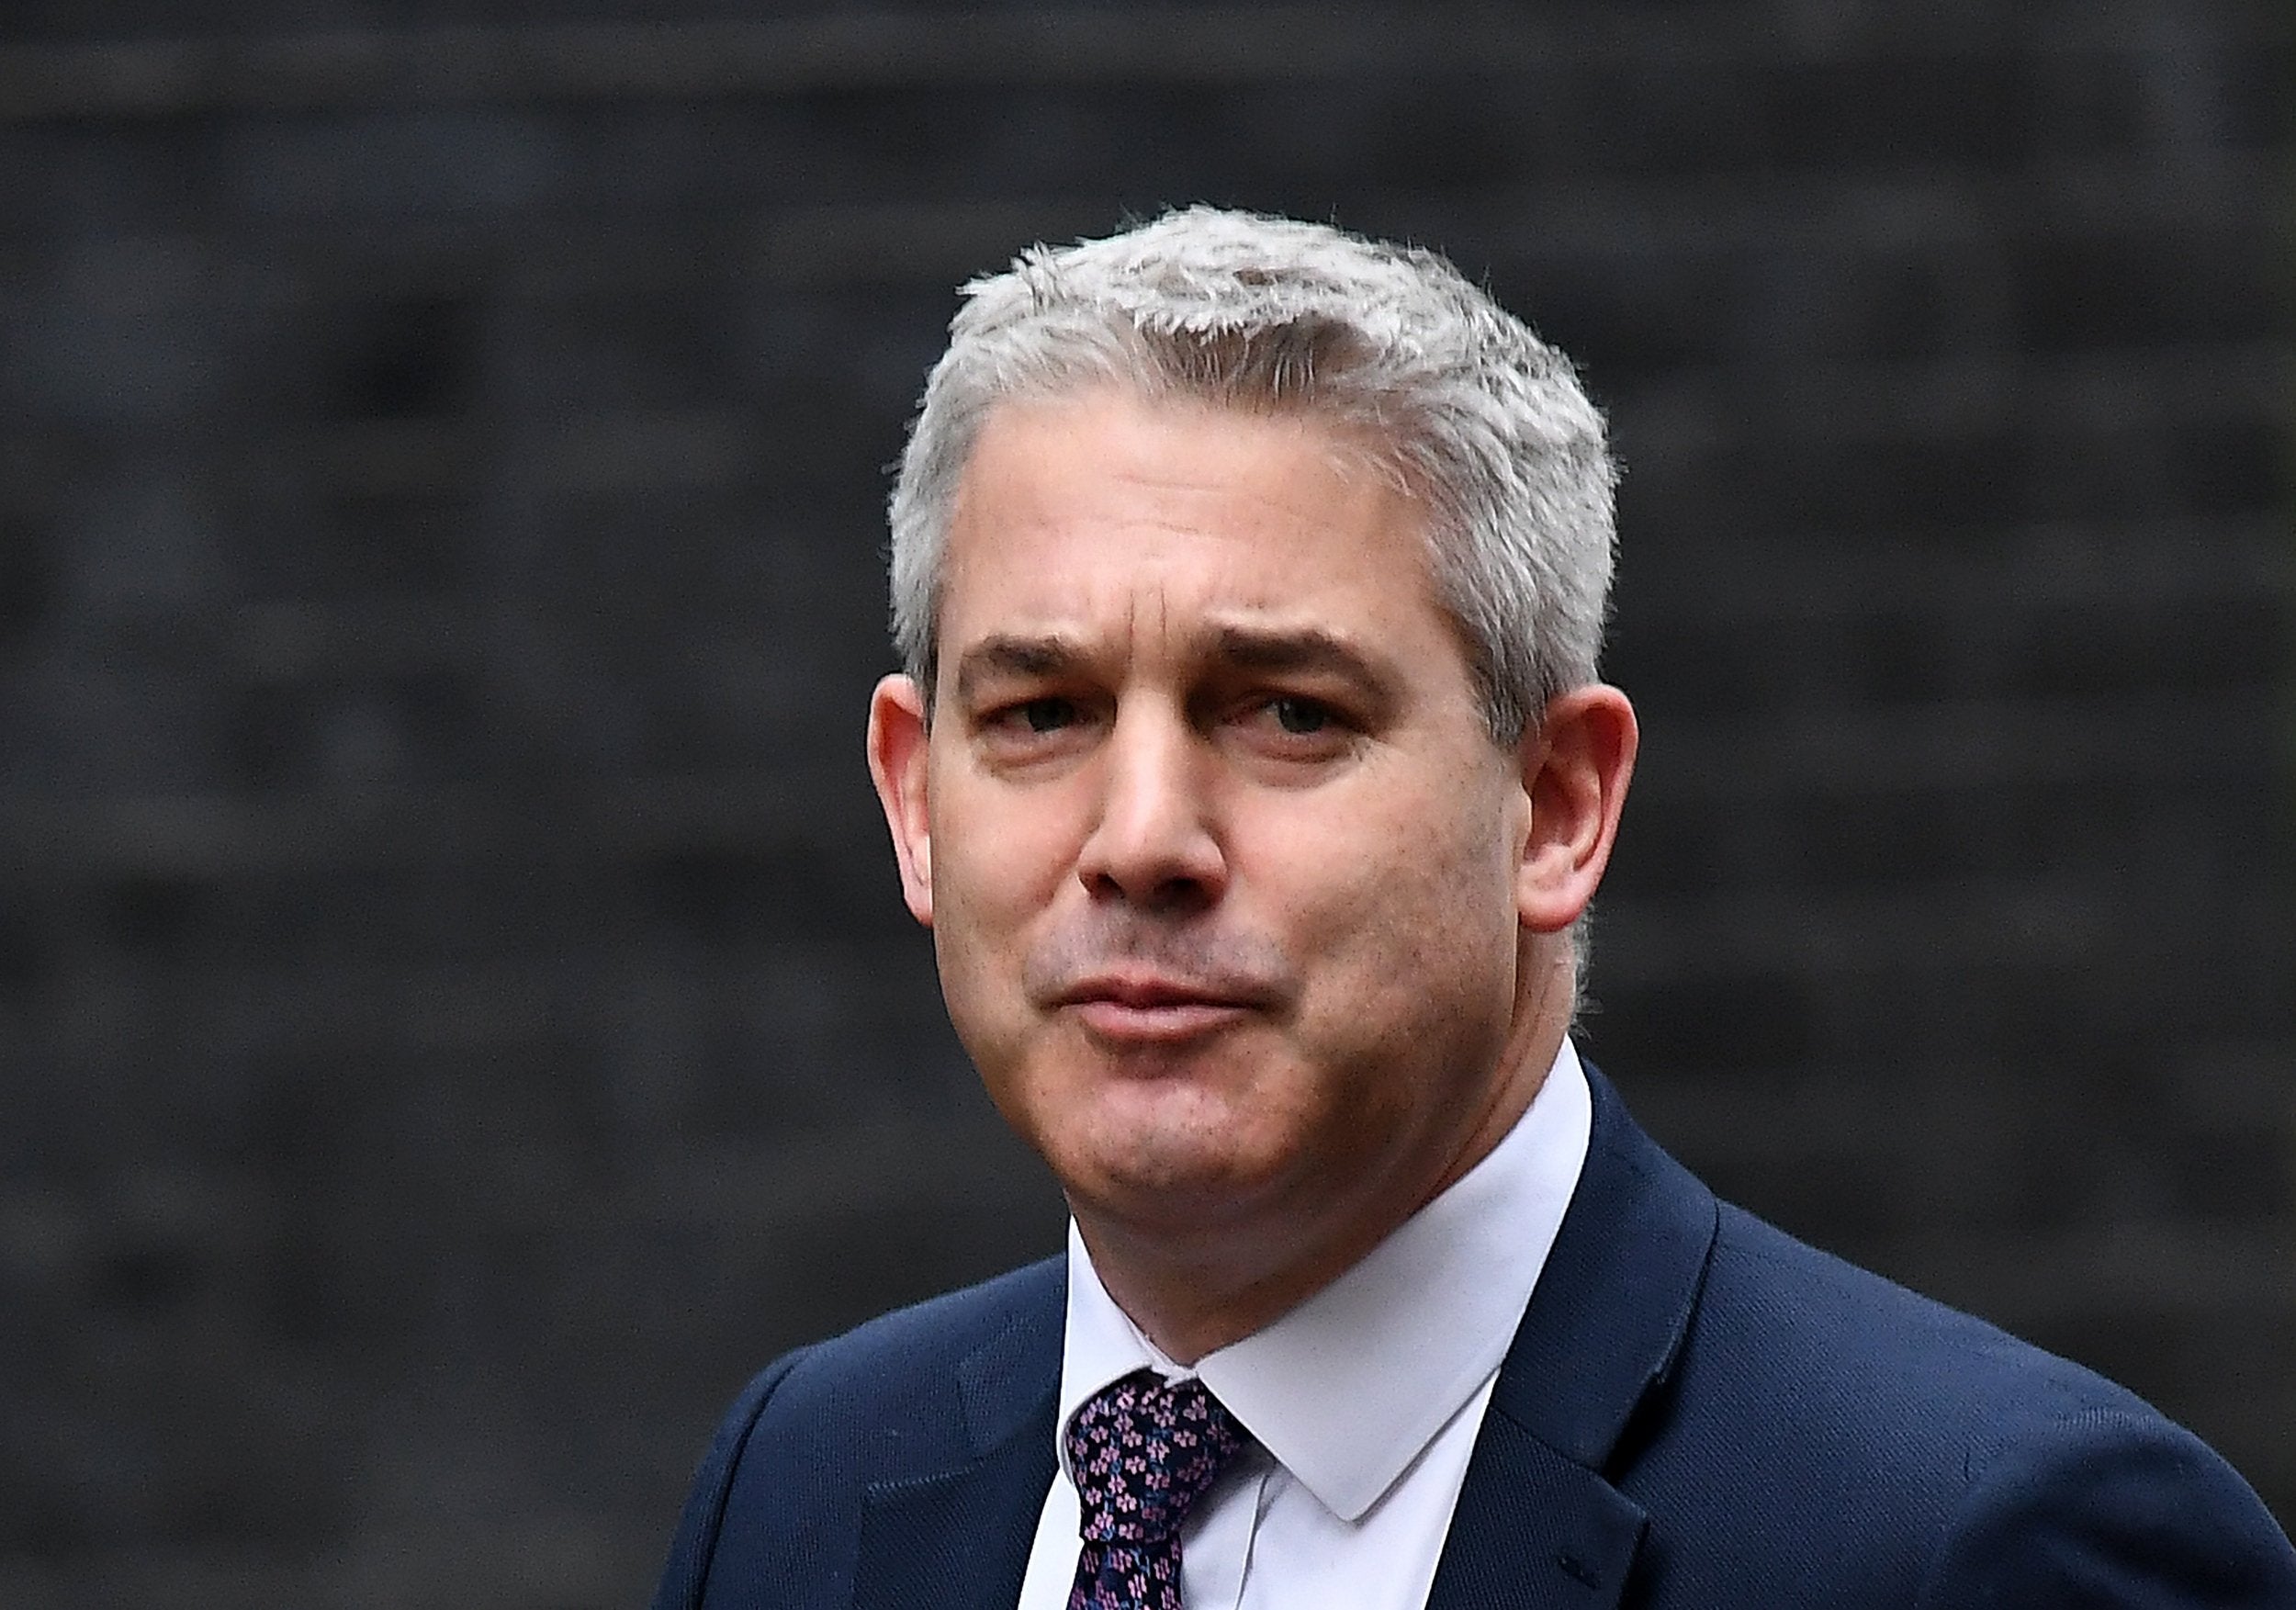 Stephen Barclay, Brexit secretary, said Ireland would suffer from no deal